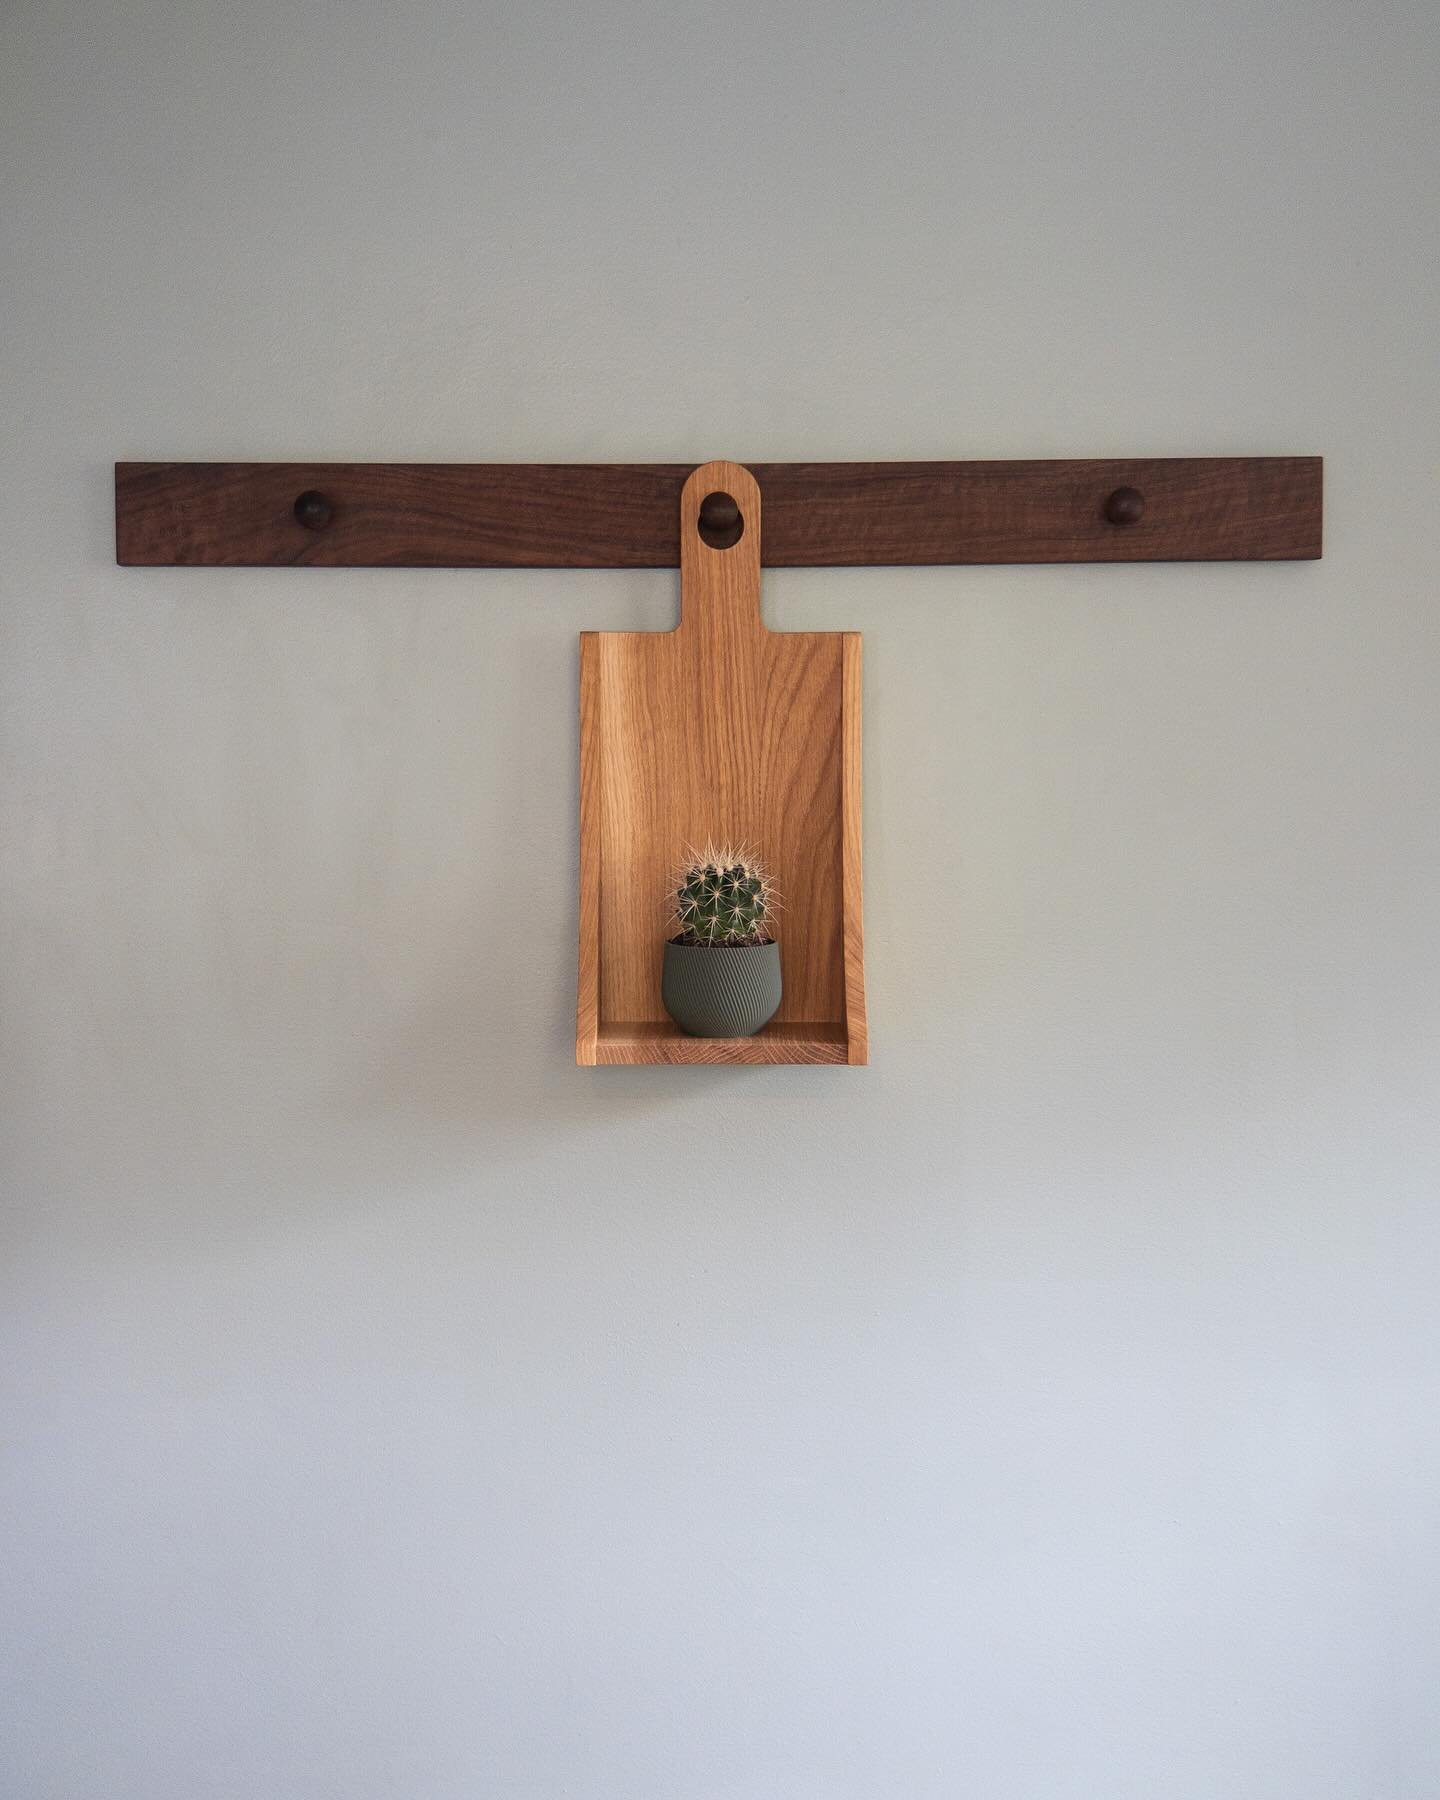 The Peggy Short Shelf is our first member of the Peggy Collection.

The Short Shelf hangs neatly on any wall hook, though particularly partial to the Peggy Pegboard, creating a perfect perch for your prized objects. Available in any of five wood spec